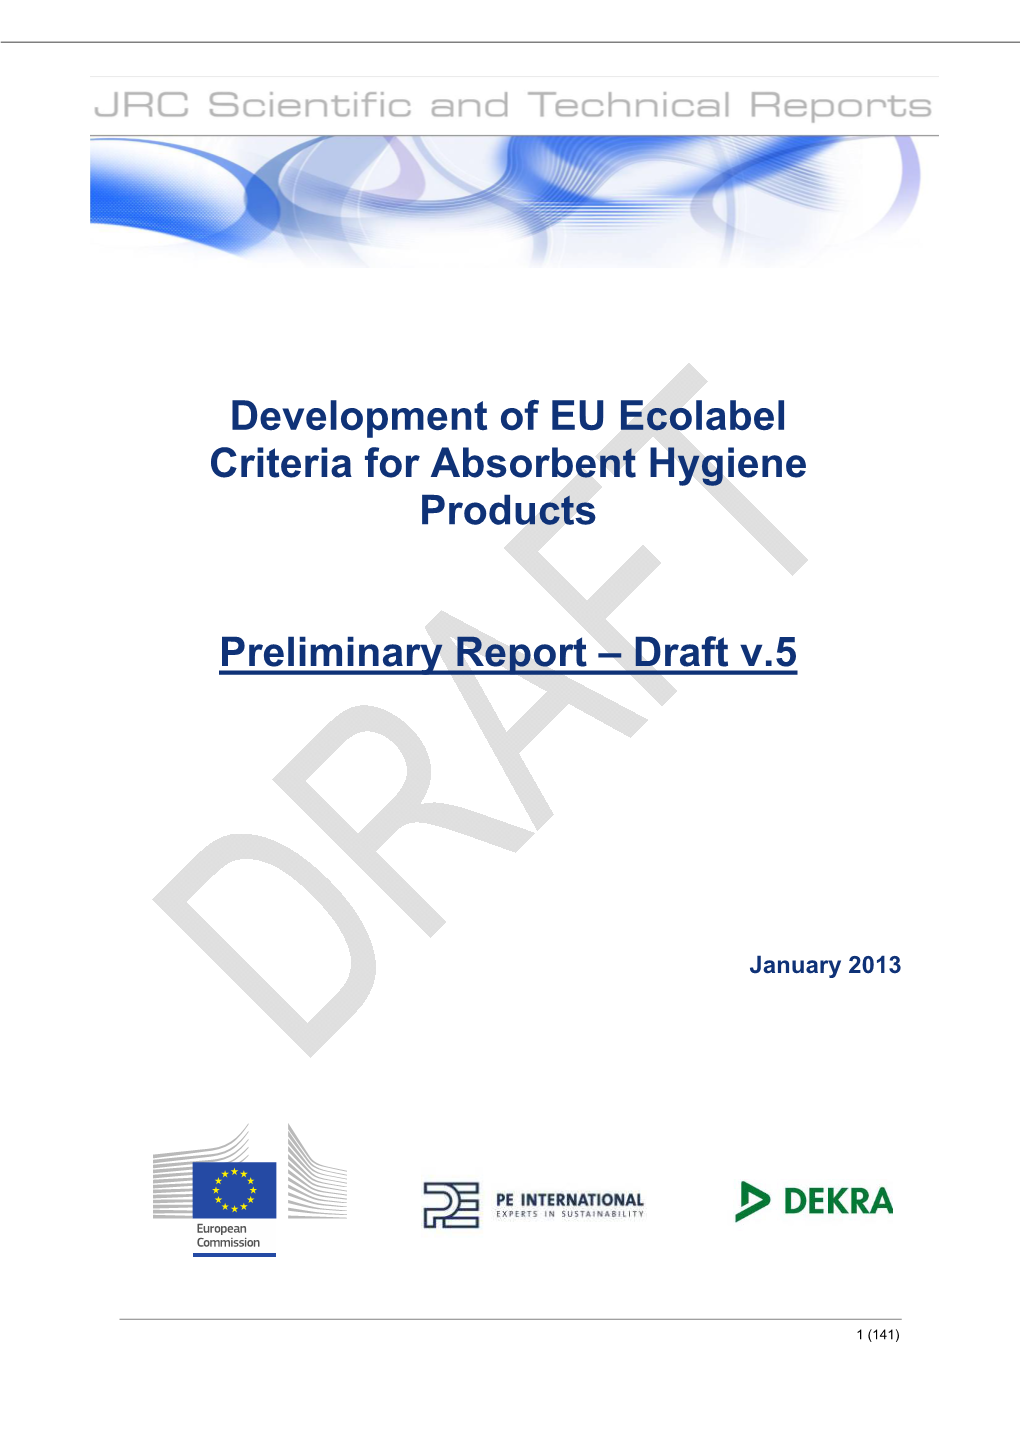 Development of EU Ecolabel Criteria for Absorbent Hygiene Products